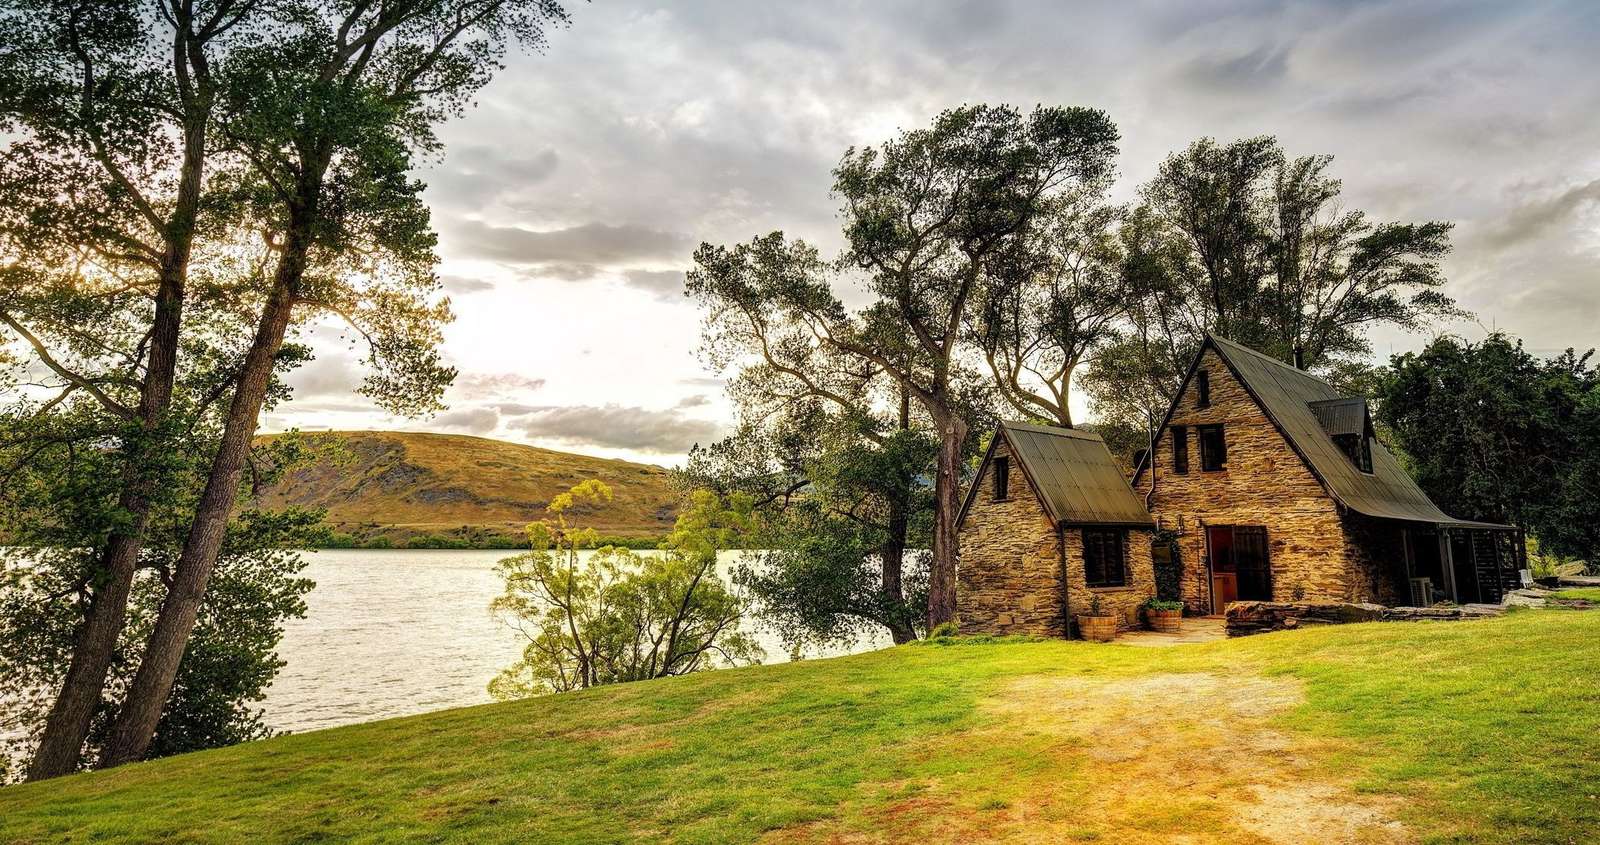 Shack at the lake jigsaw puzzle online